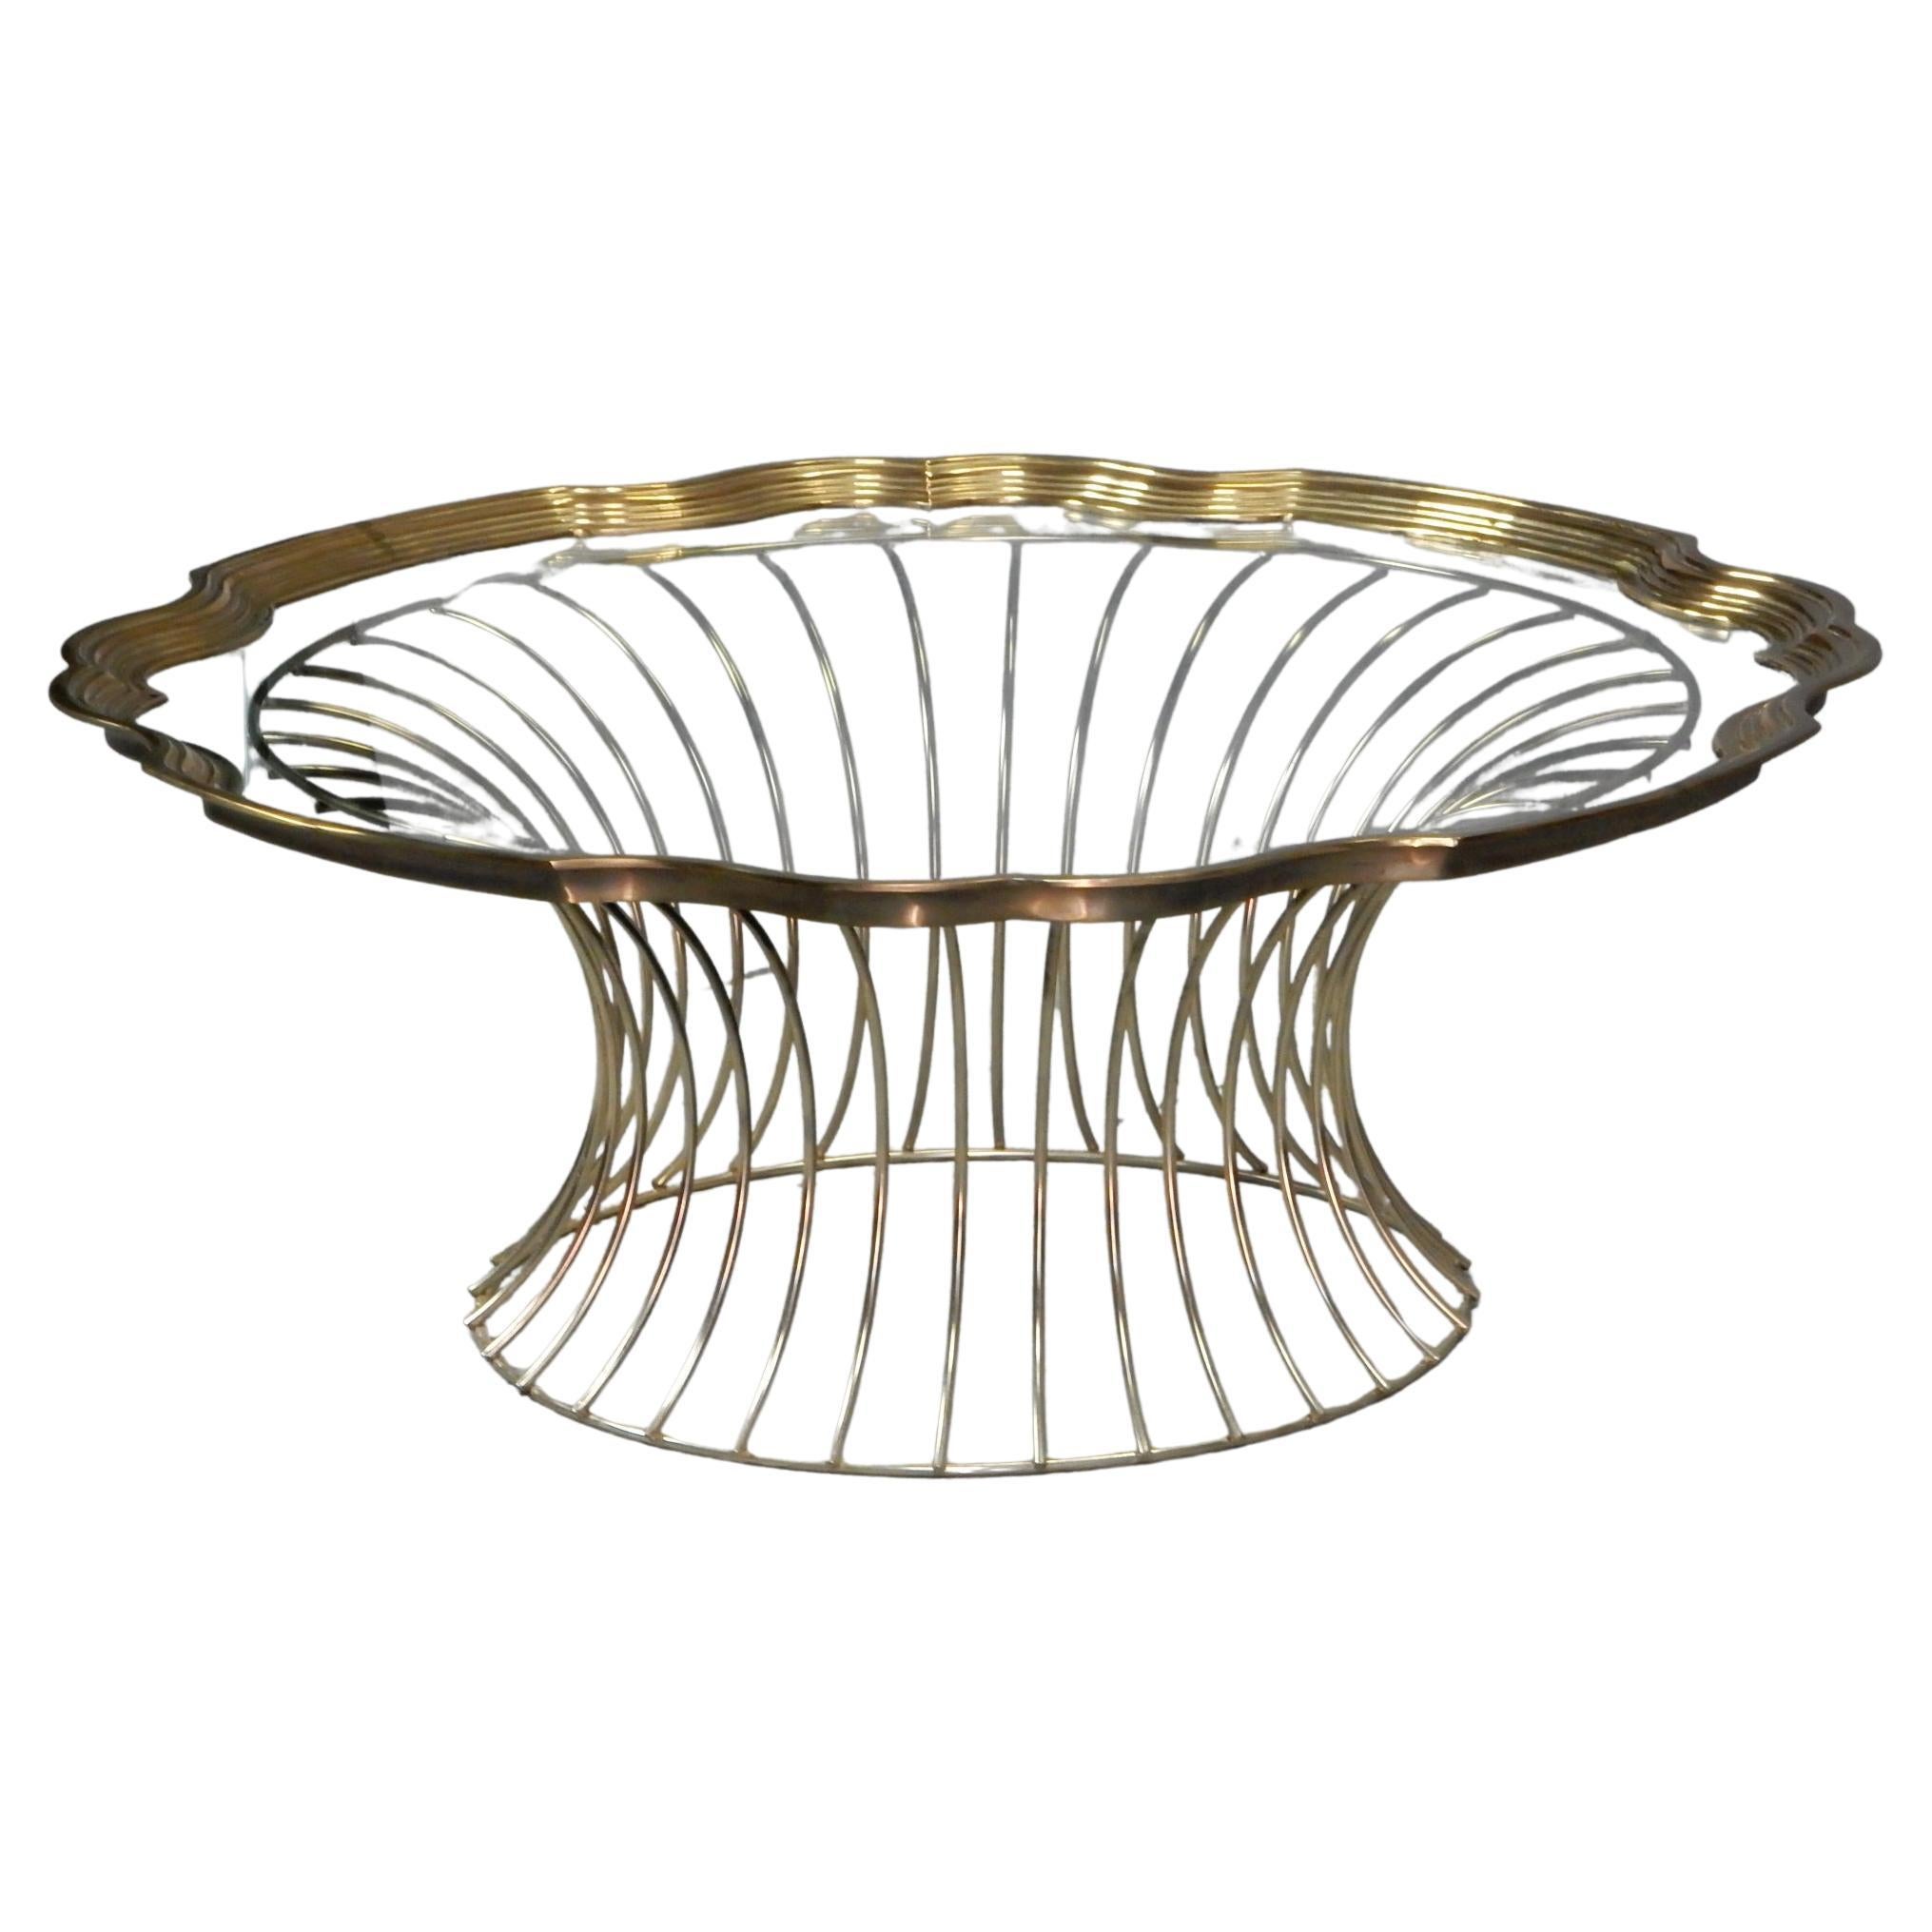 Aesthetically pleasing brass wire and framed glass tray coffee table.
Exceptional quality, circa 1960's. 47